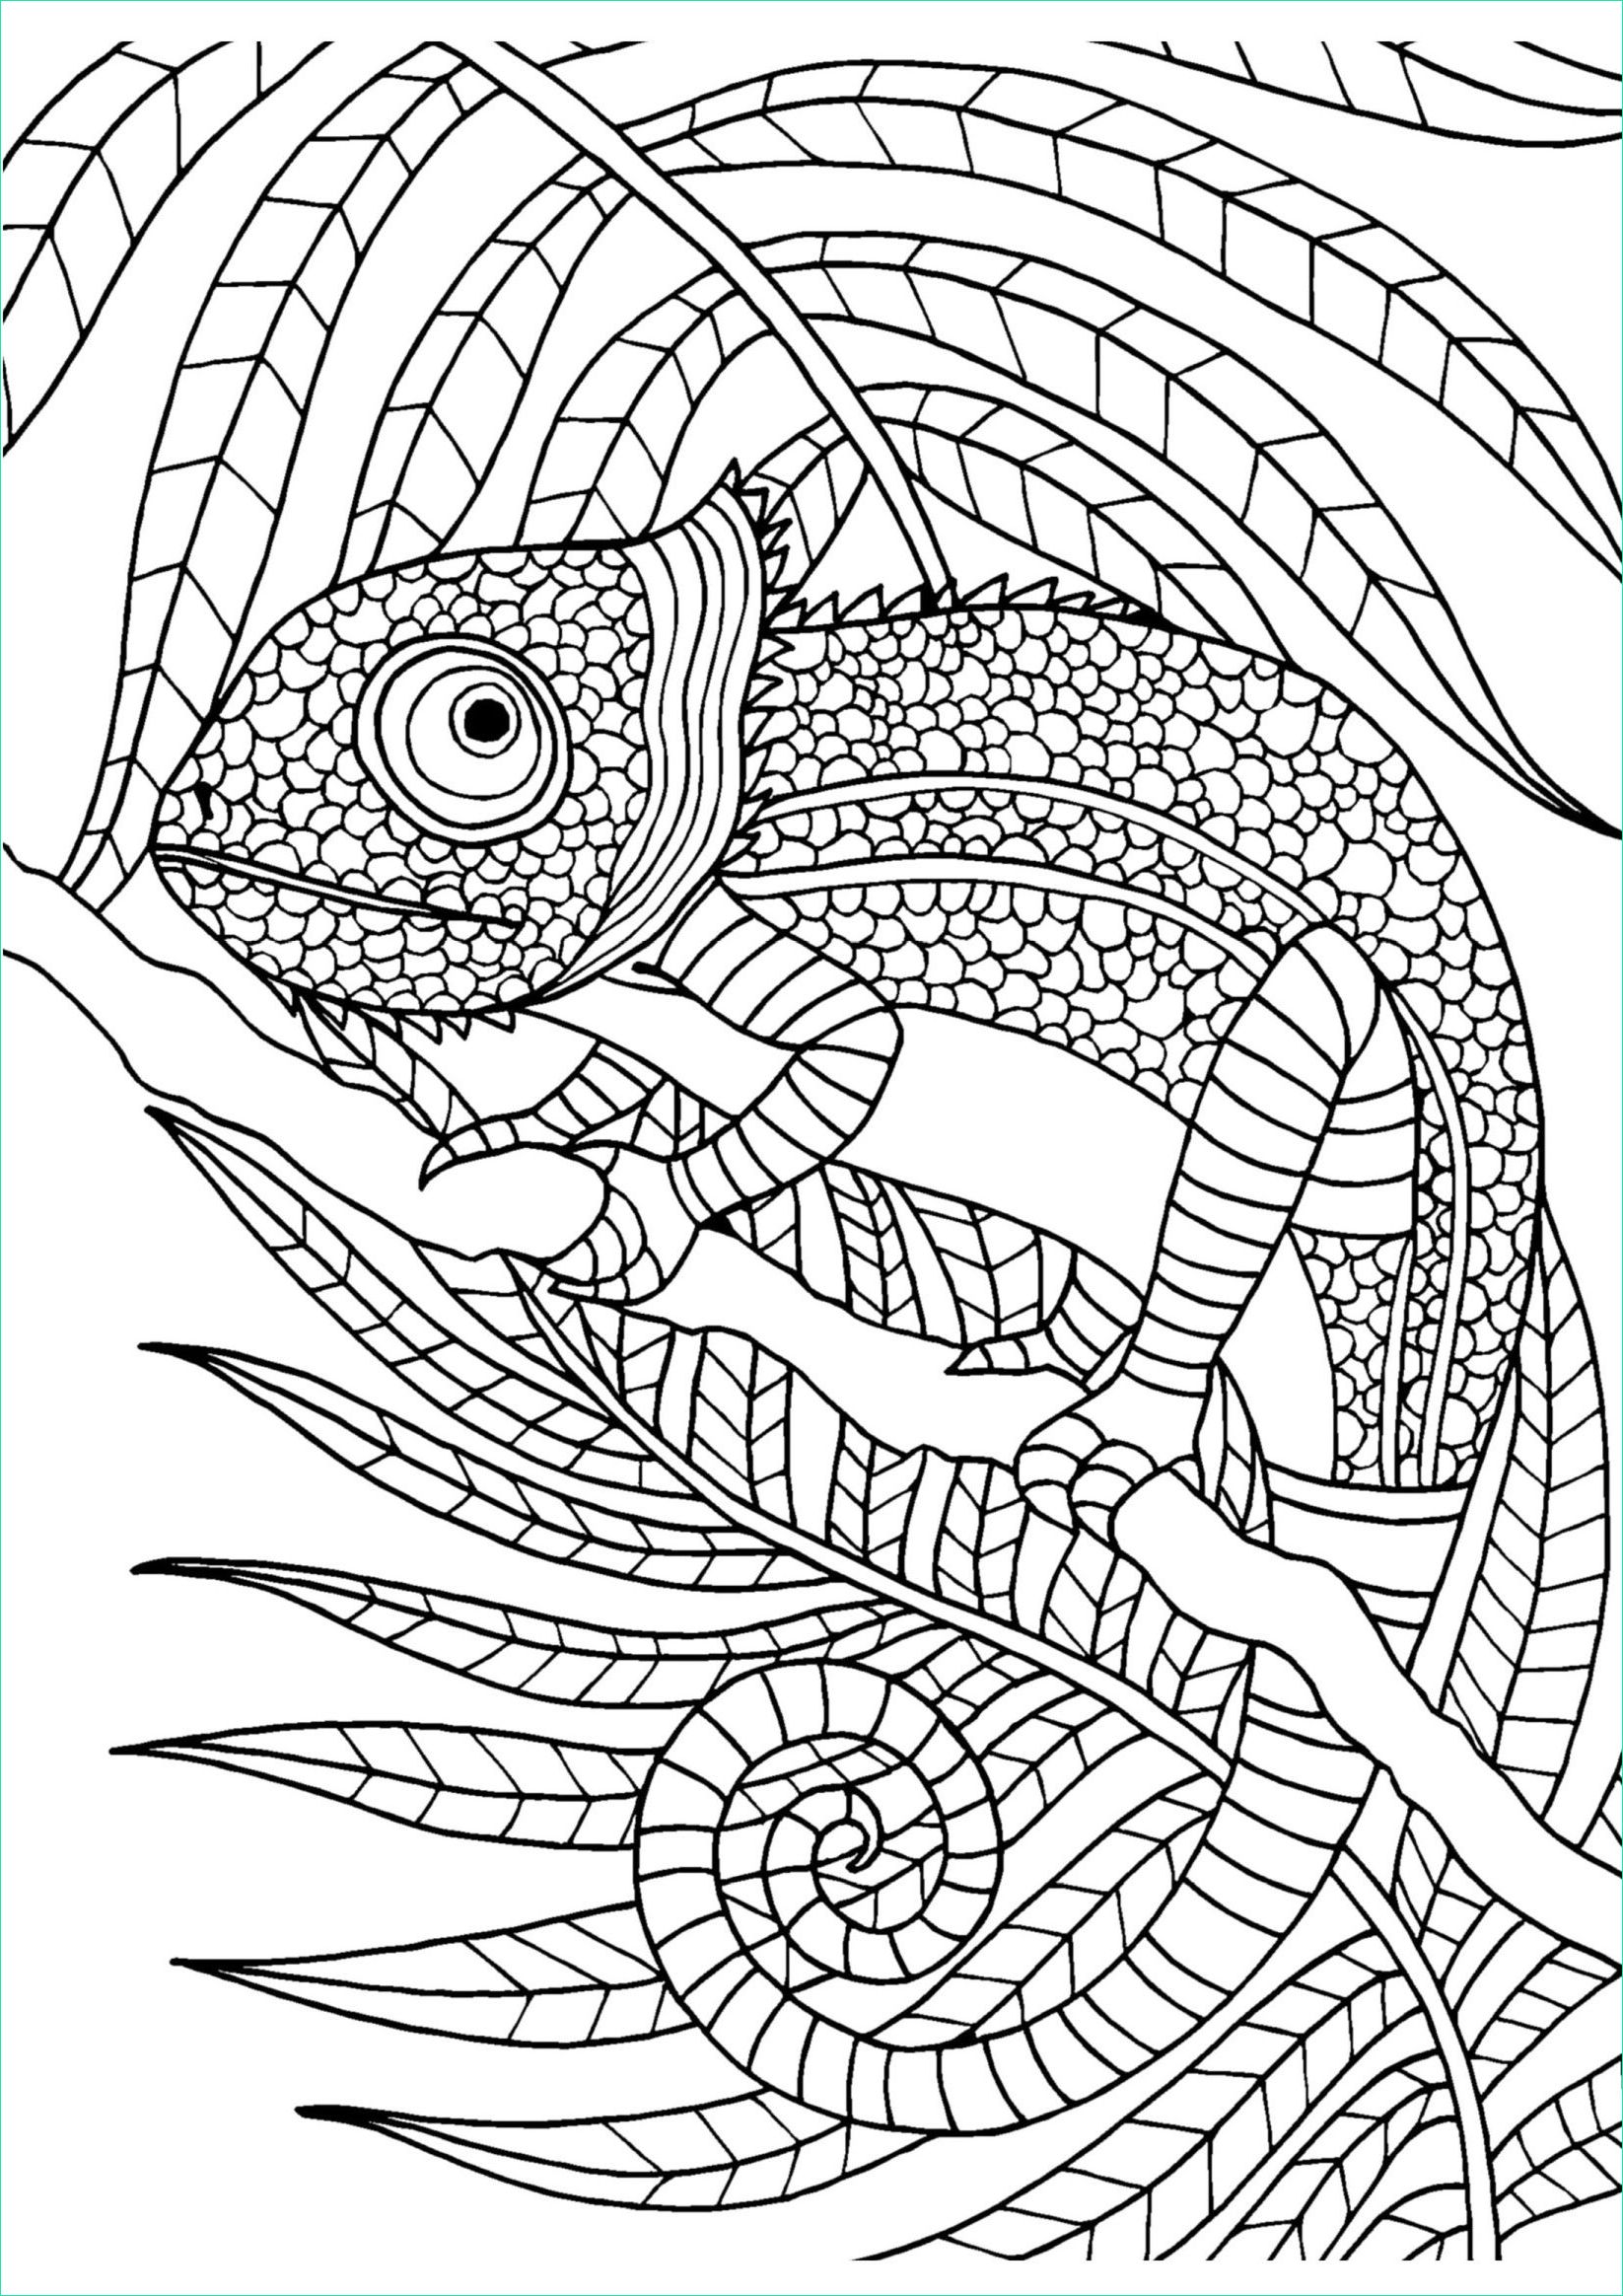 Mandala Cameleon Nouveau Photos Chameleon Adult Colouring Page Colouring In Sheets Art